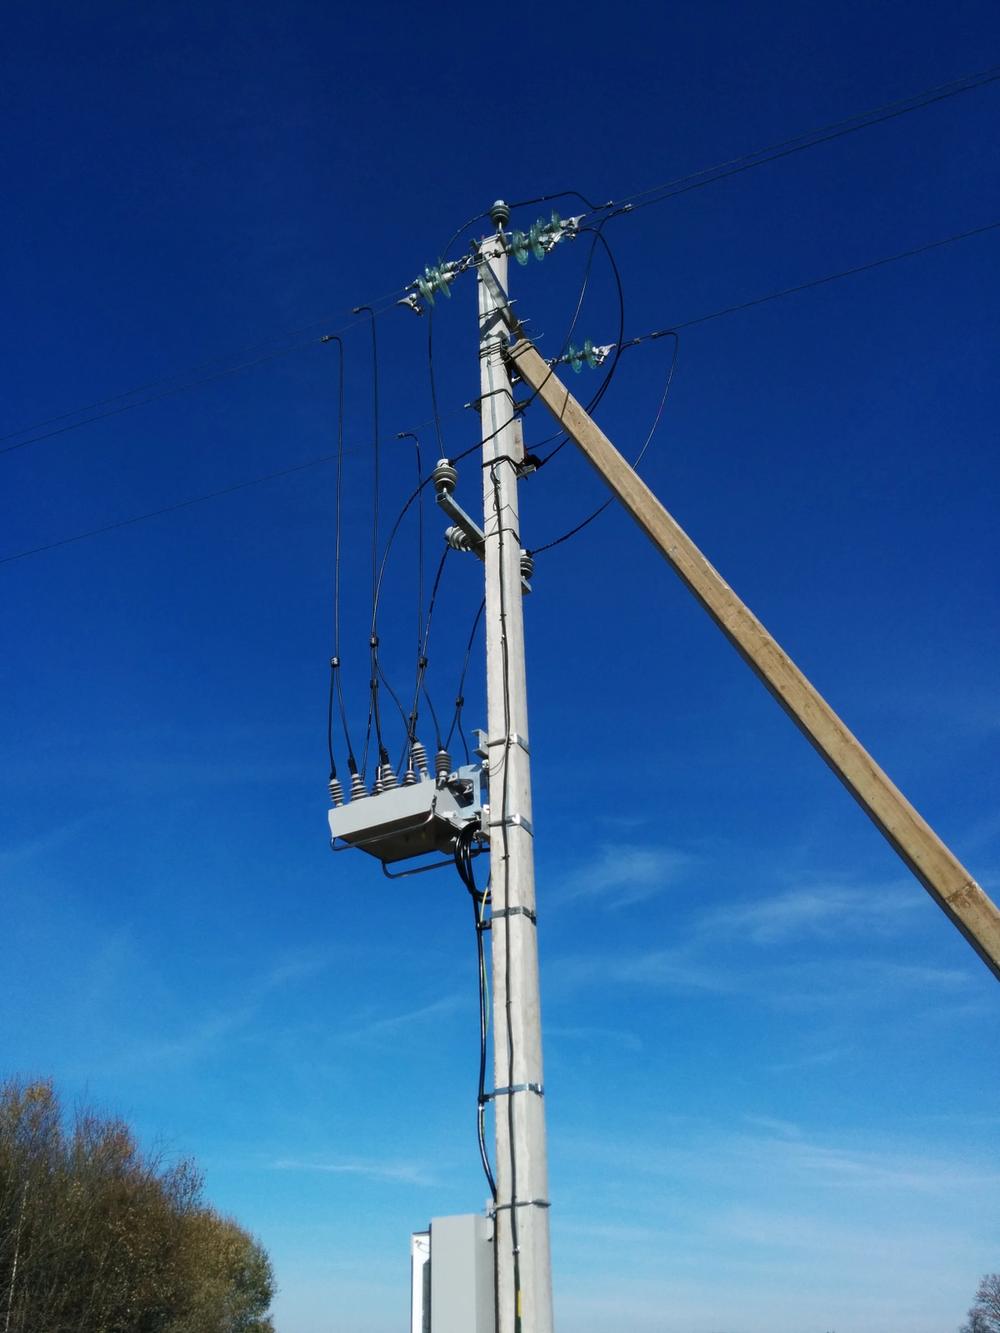 Pole mounted NOJA Power OSM Recloser in Lithuania taken from below with clear blue skies